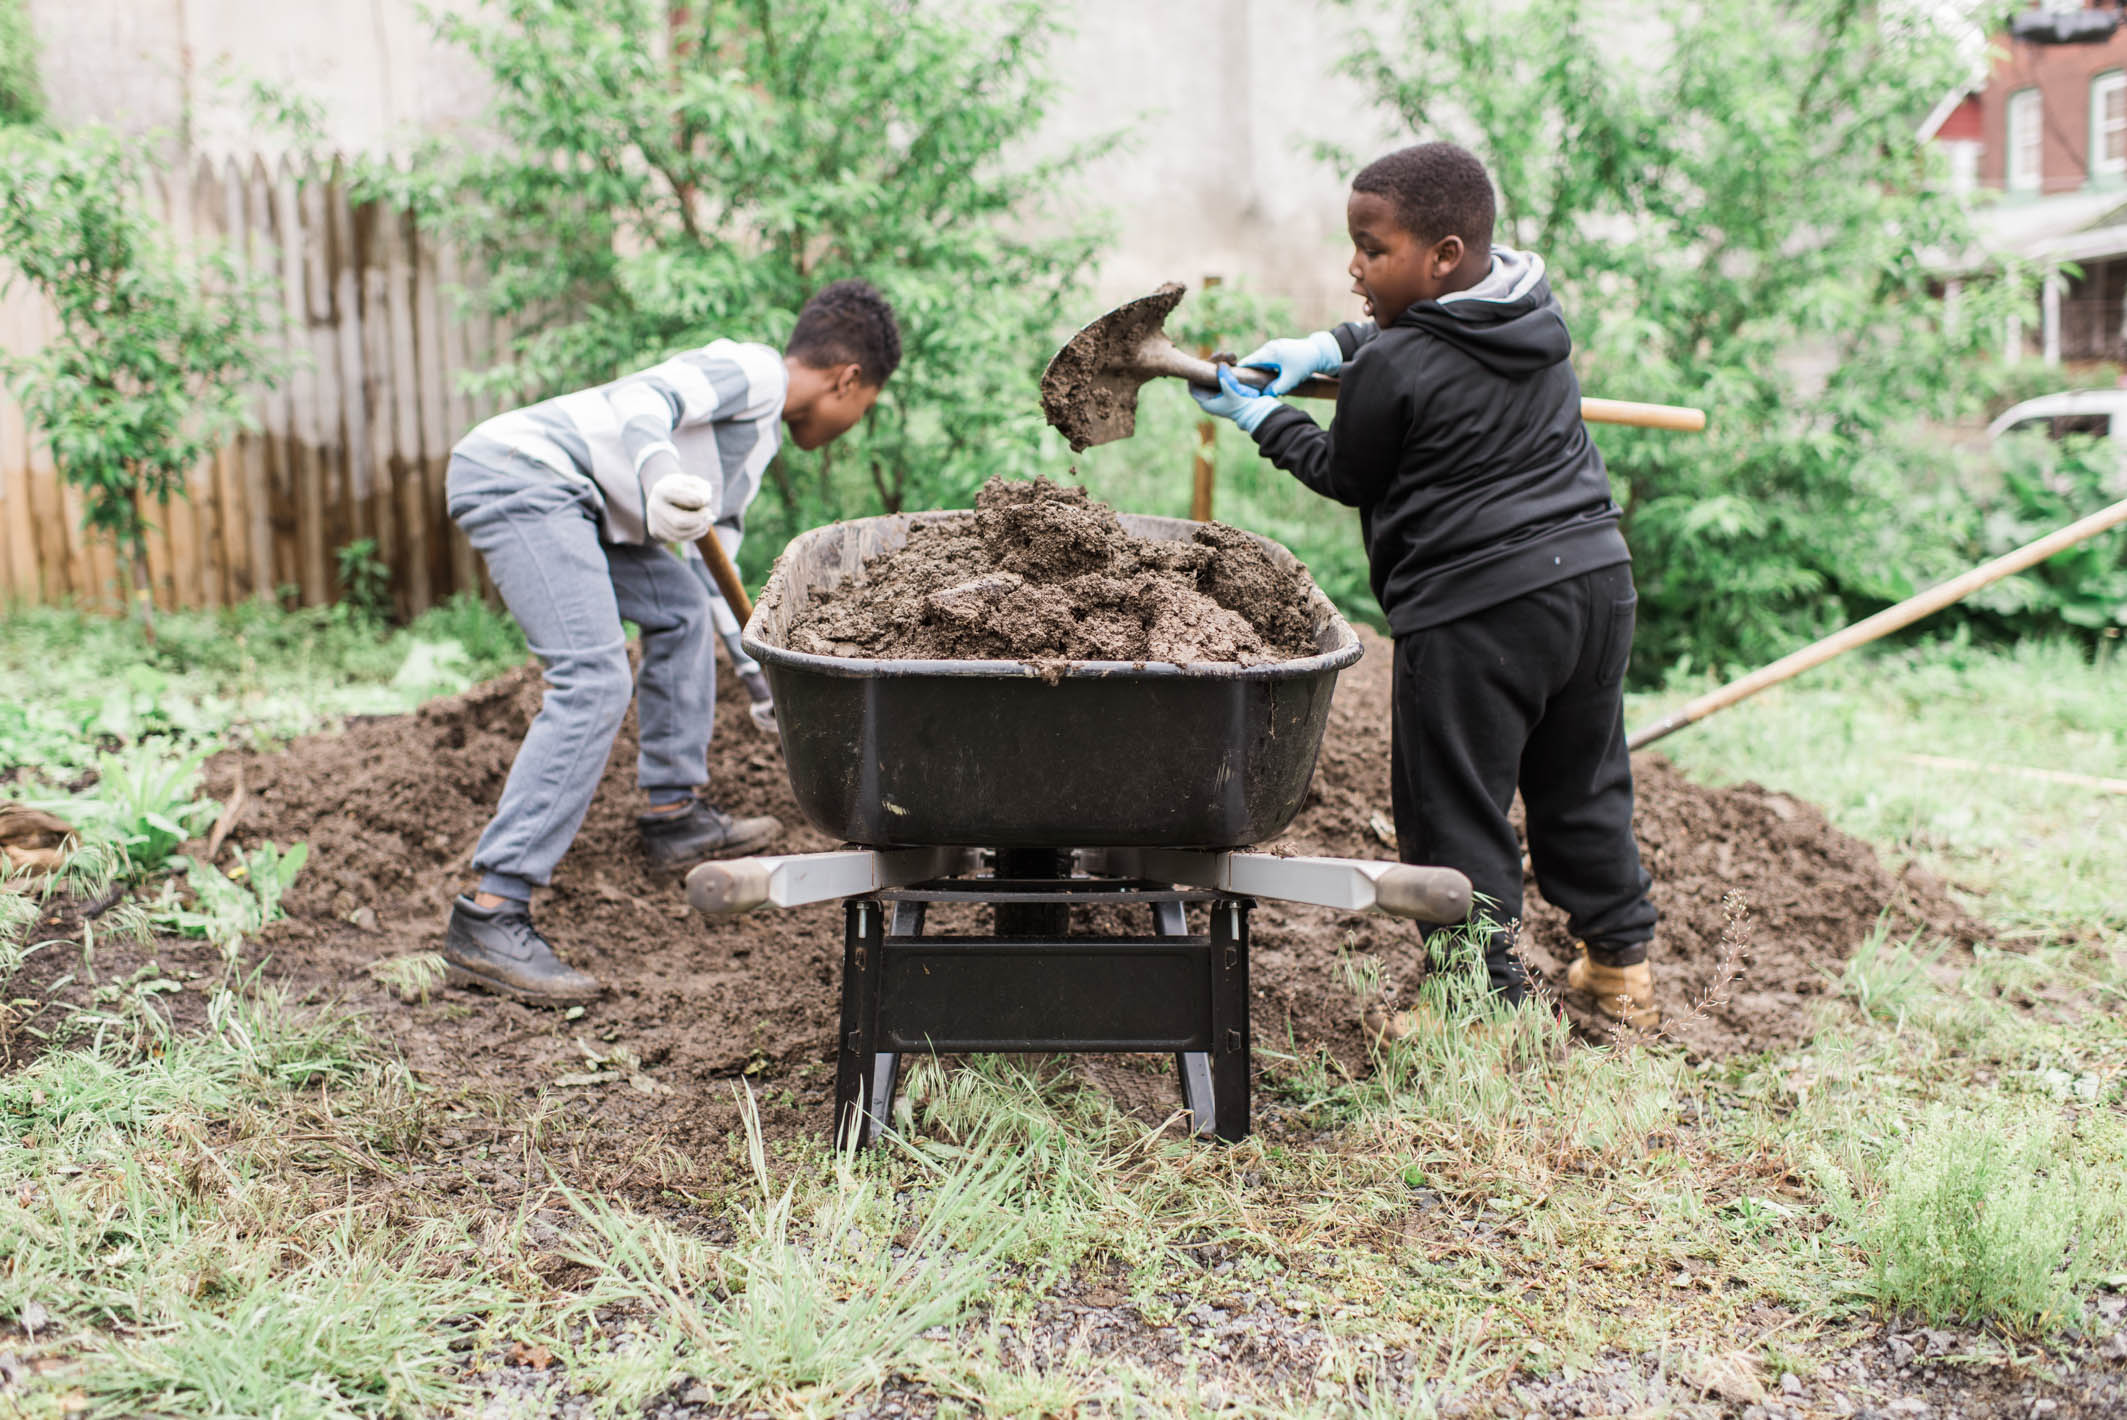 The Greenworks magazine includes tips for urban farming and soil safety | Ali Mendelson